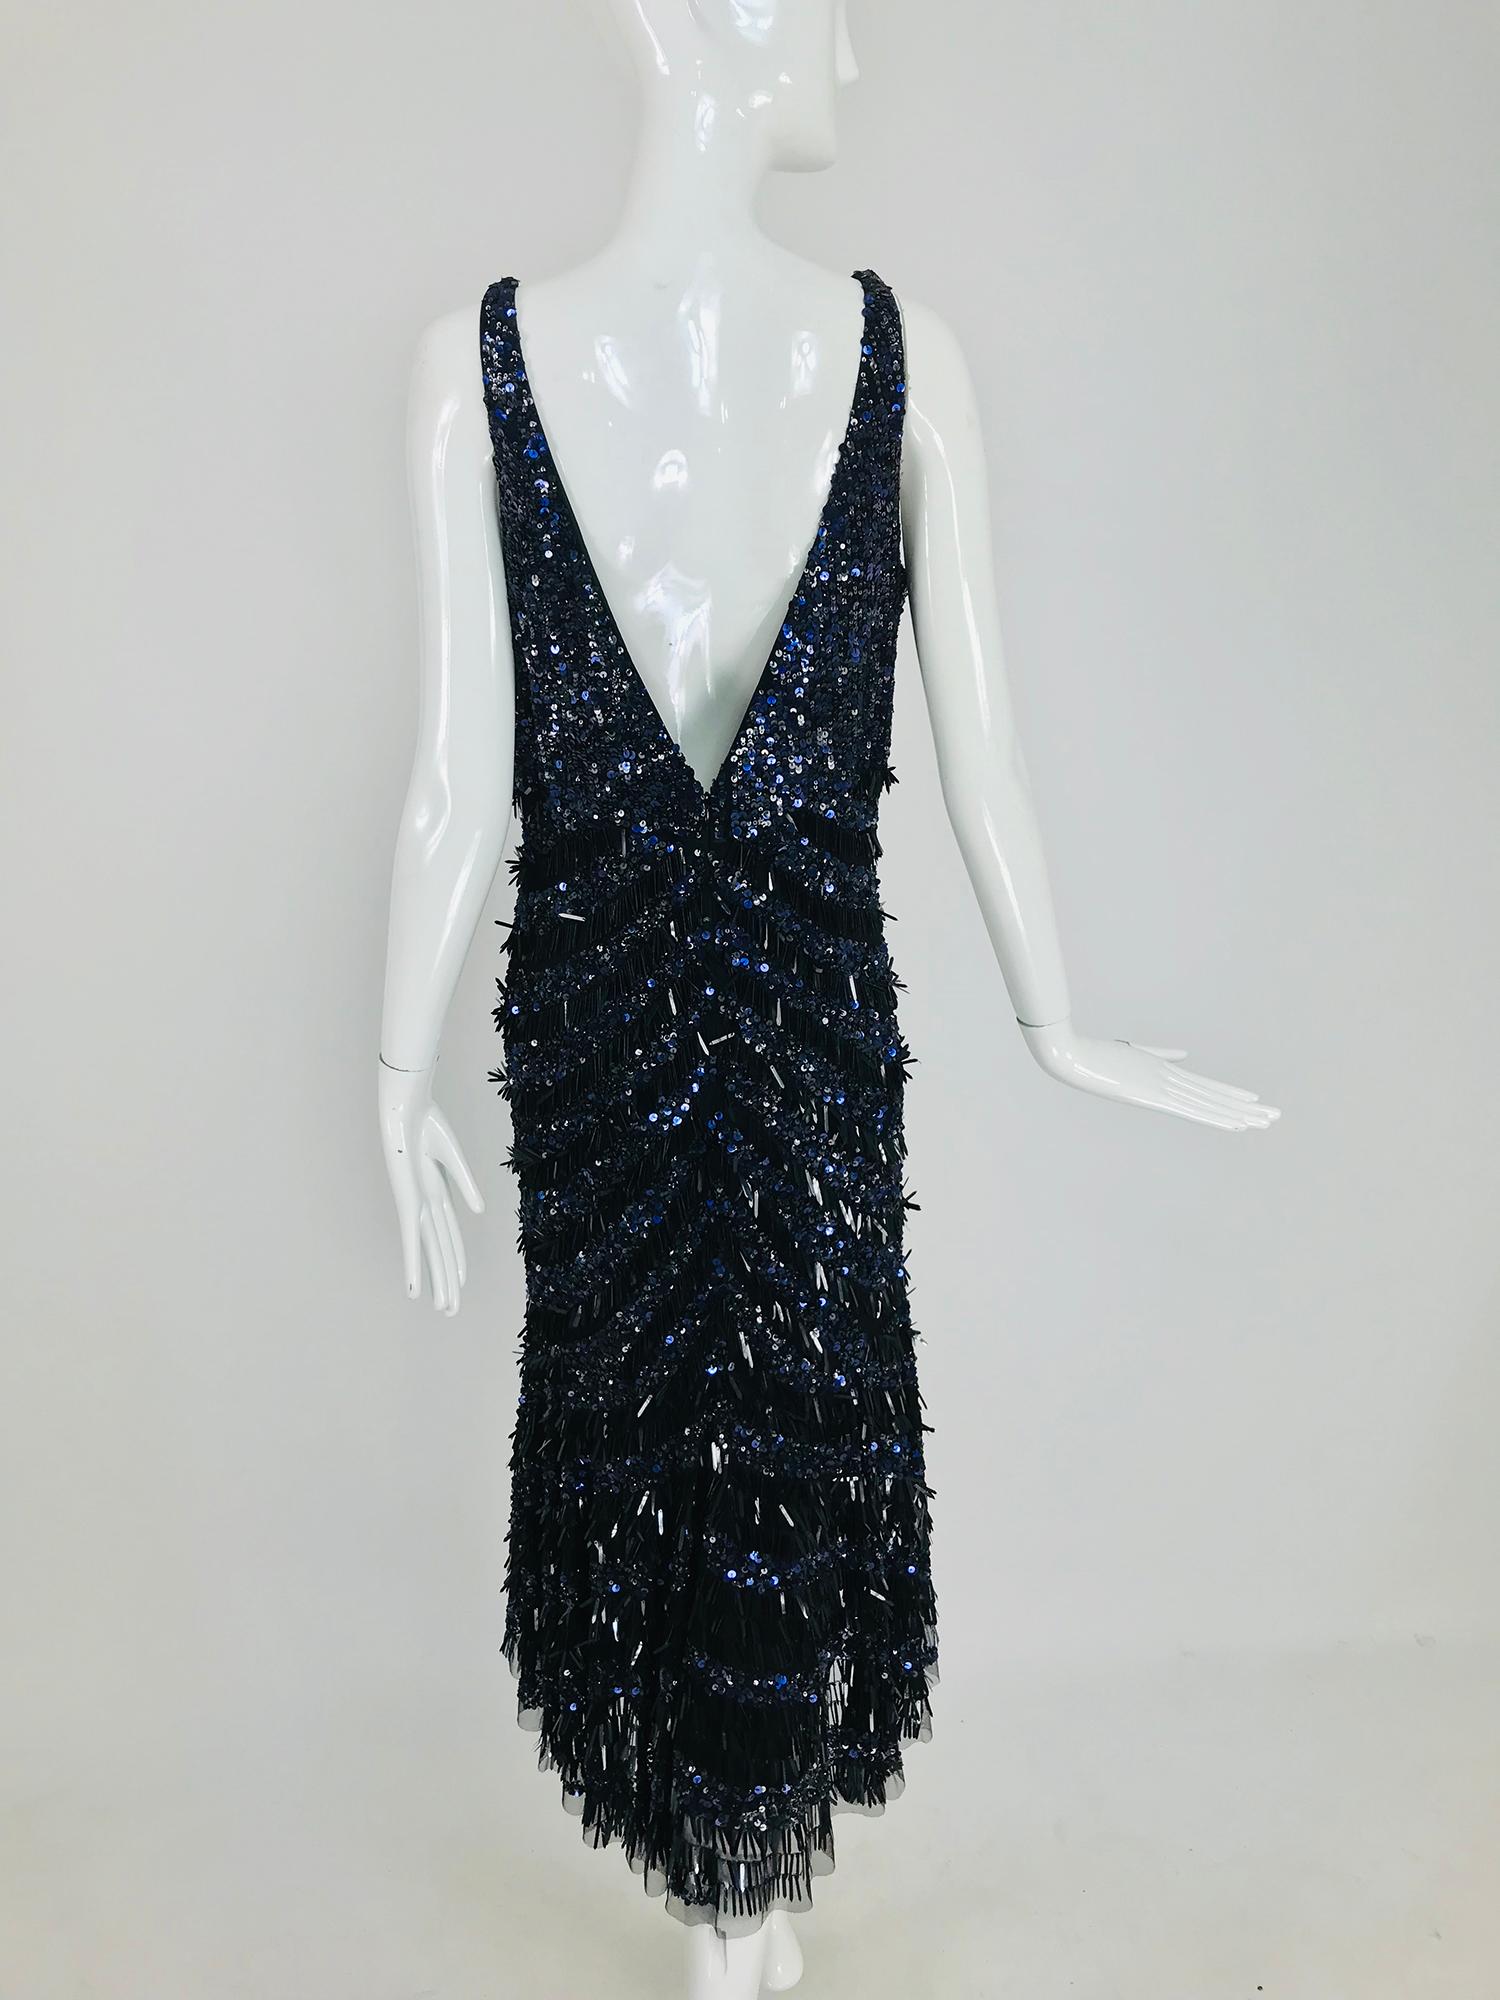 Theia Sequin Evening Cocktail Dress in Black and Blue 12 5